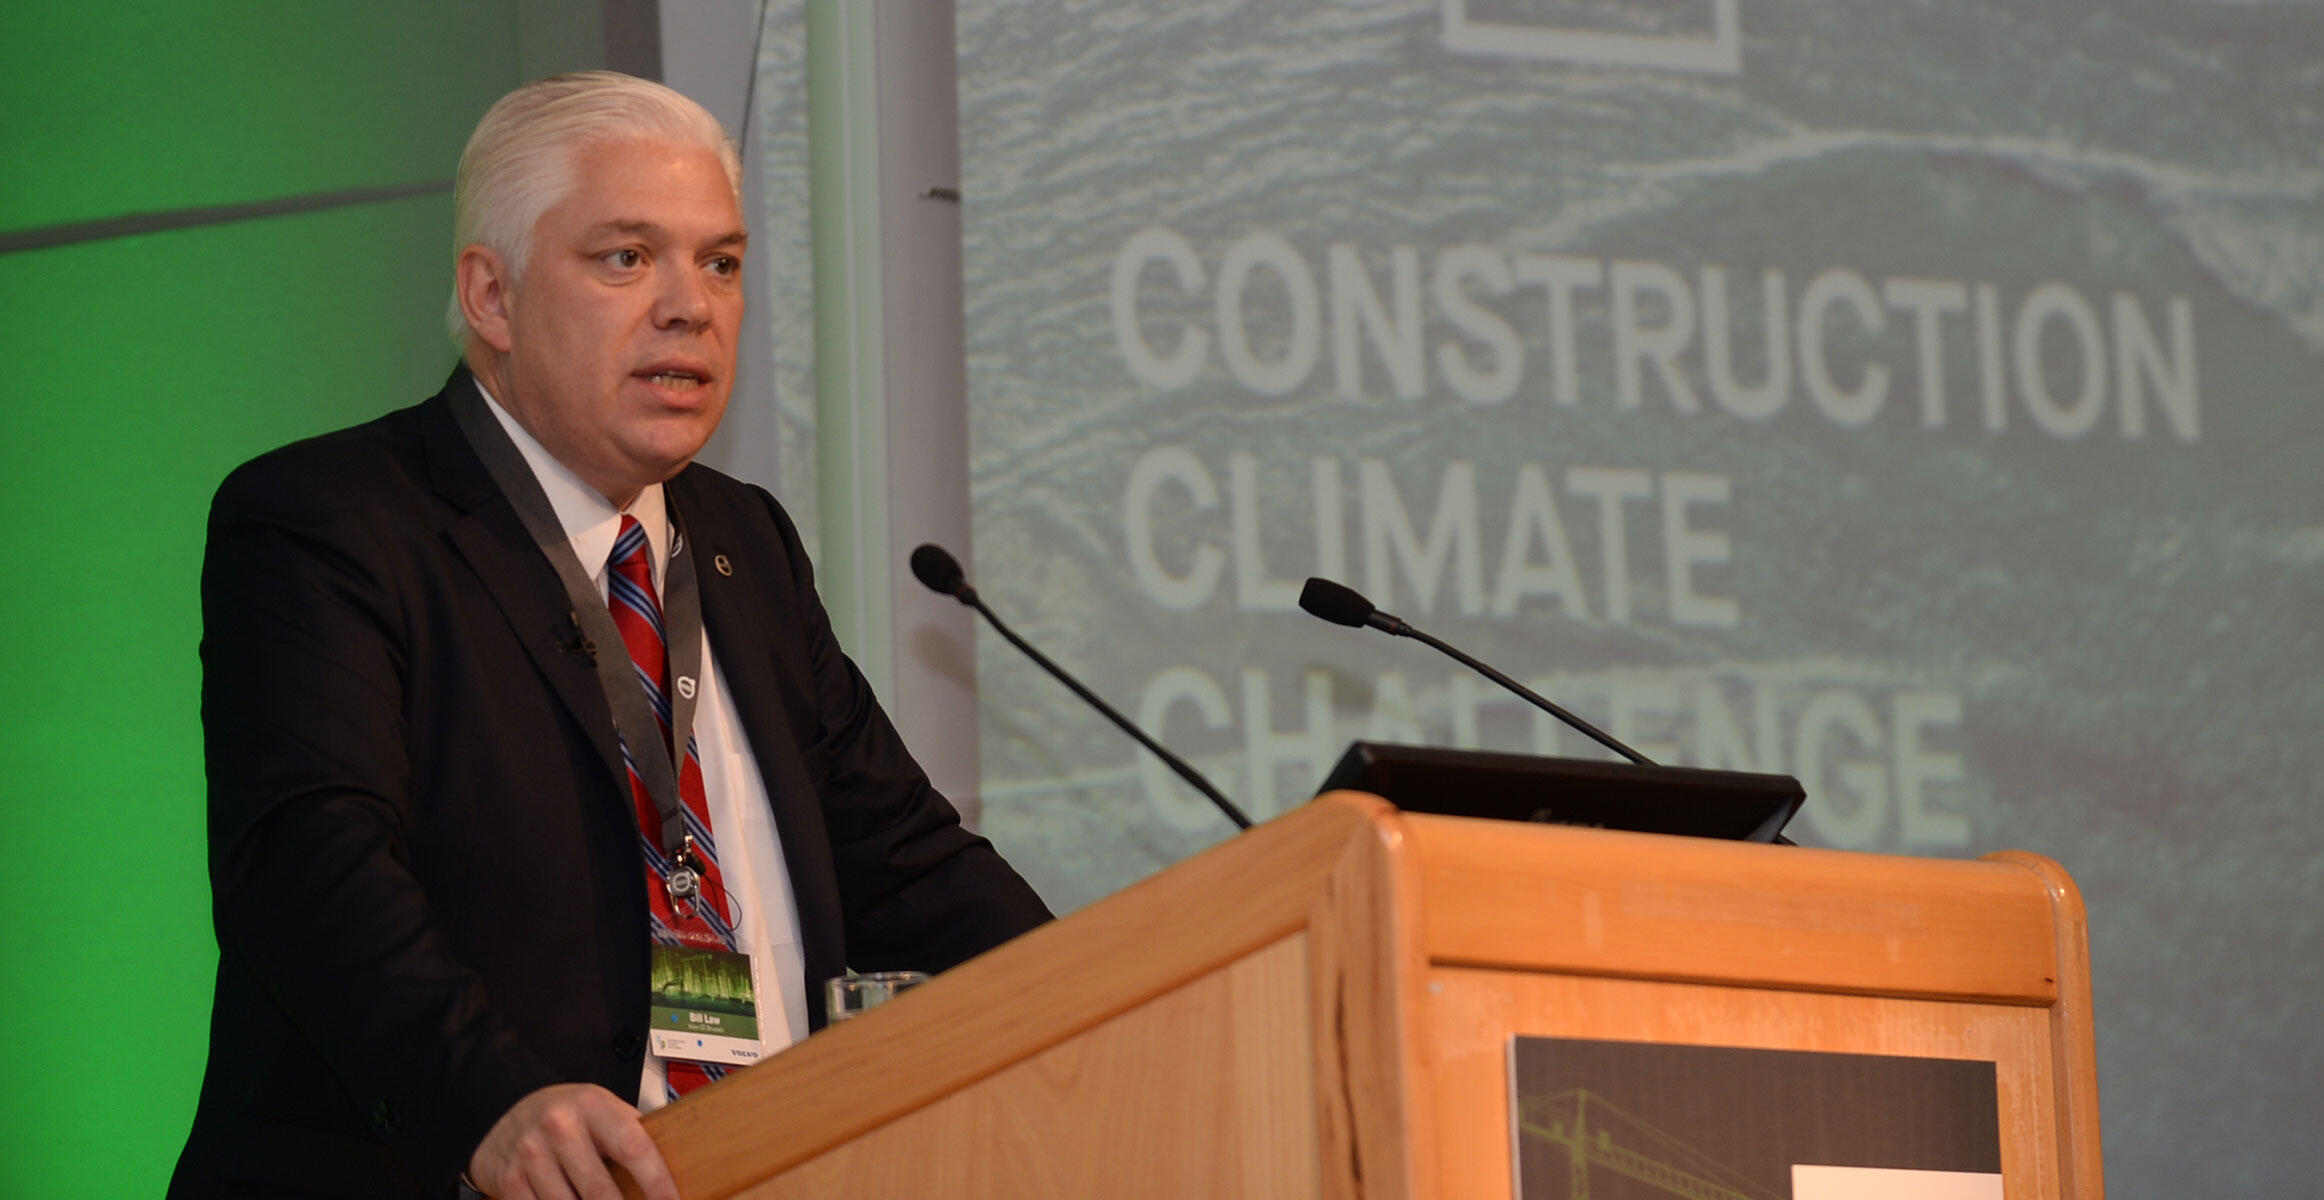 Climate seminar asserts cost saving potential of carbon reduction on infrastructure construction